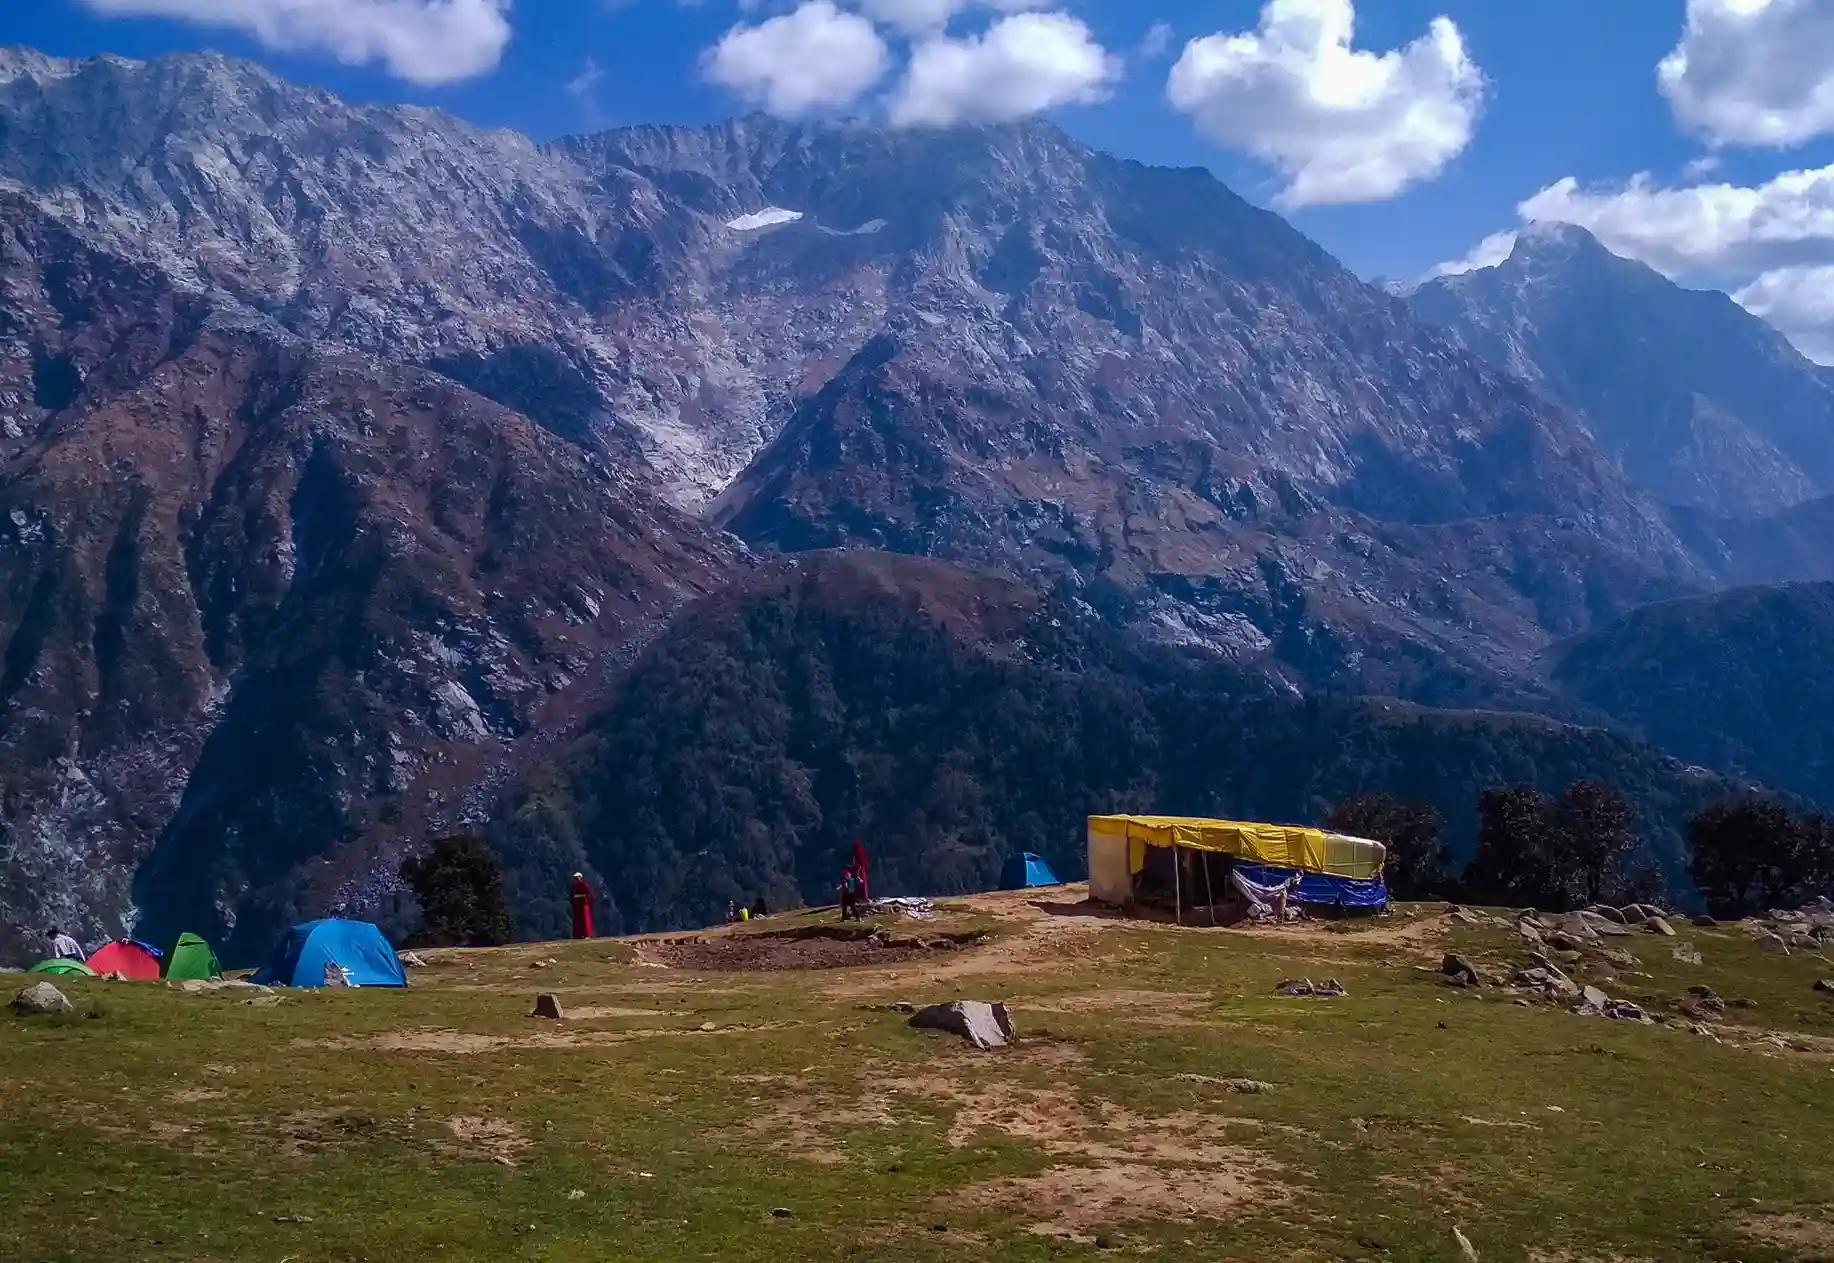 Day Excursion of Dharamshala Local with Mcleodganj Sightseeing